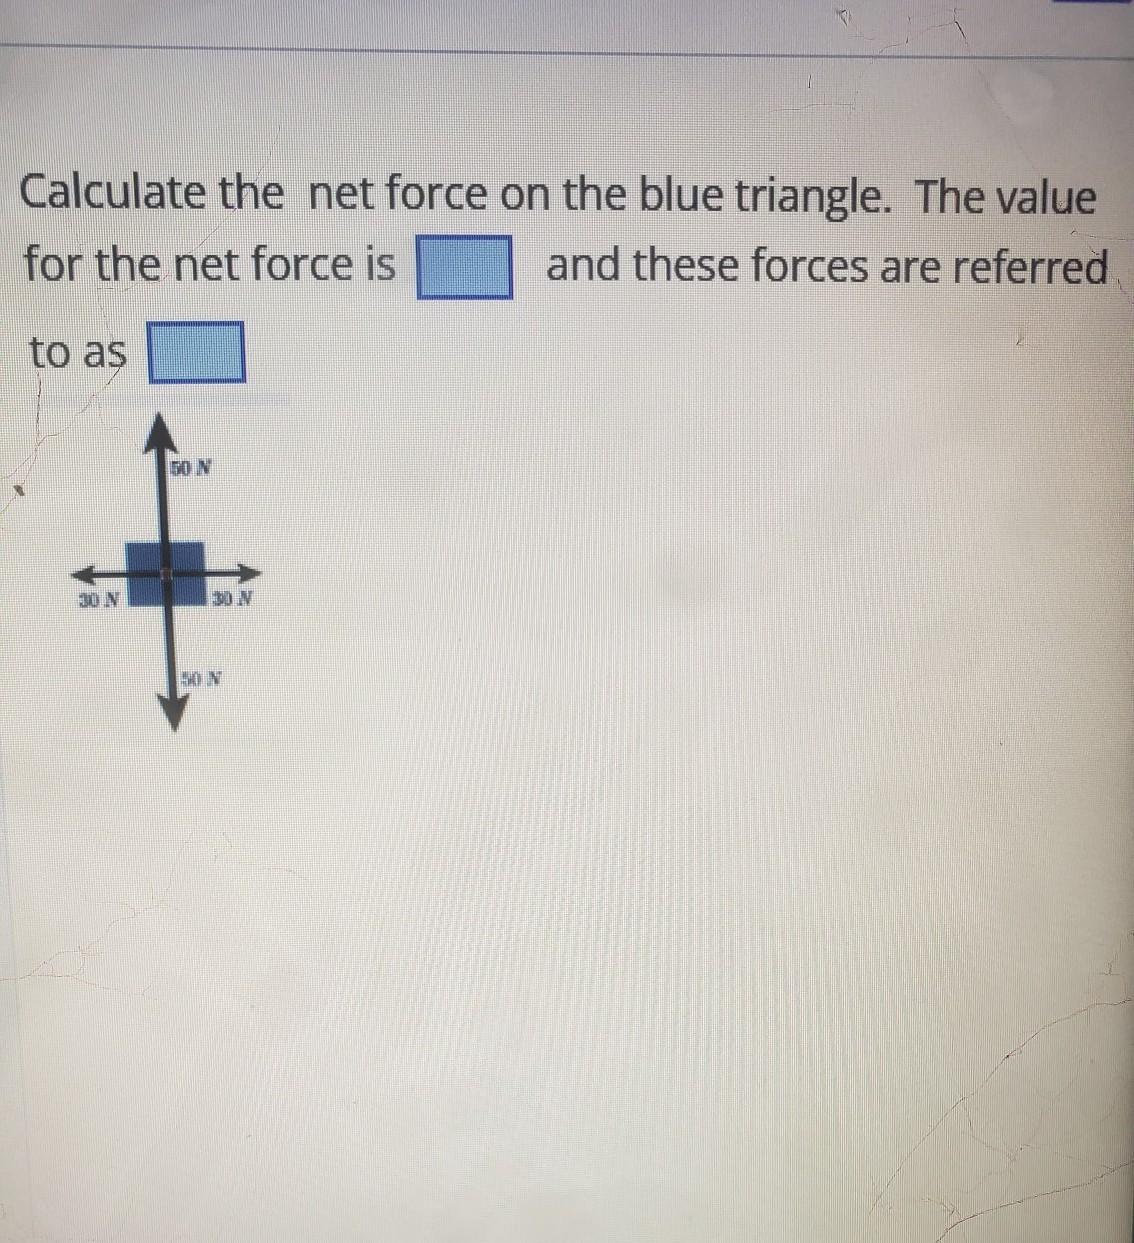 PLEASE HELP CALCULATE THE NET FORCE ON THE BLUE TRIANGLE. THE VALUE OF THE NET FORCE IS BLANK AND THESE